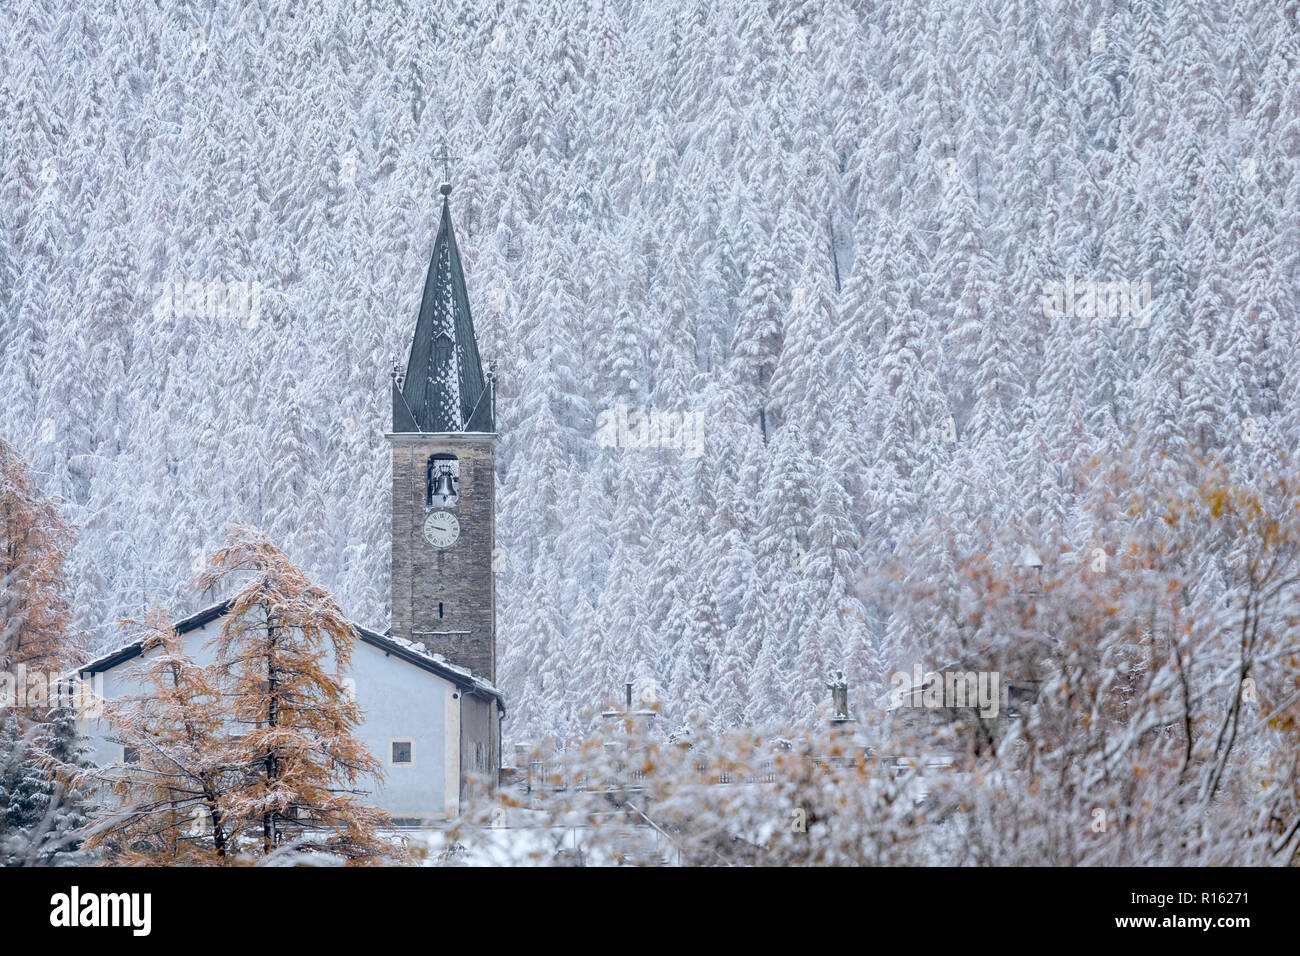 Church with bell covered in snow, Bessans, France 2018. Stock Photo